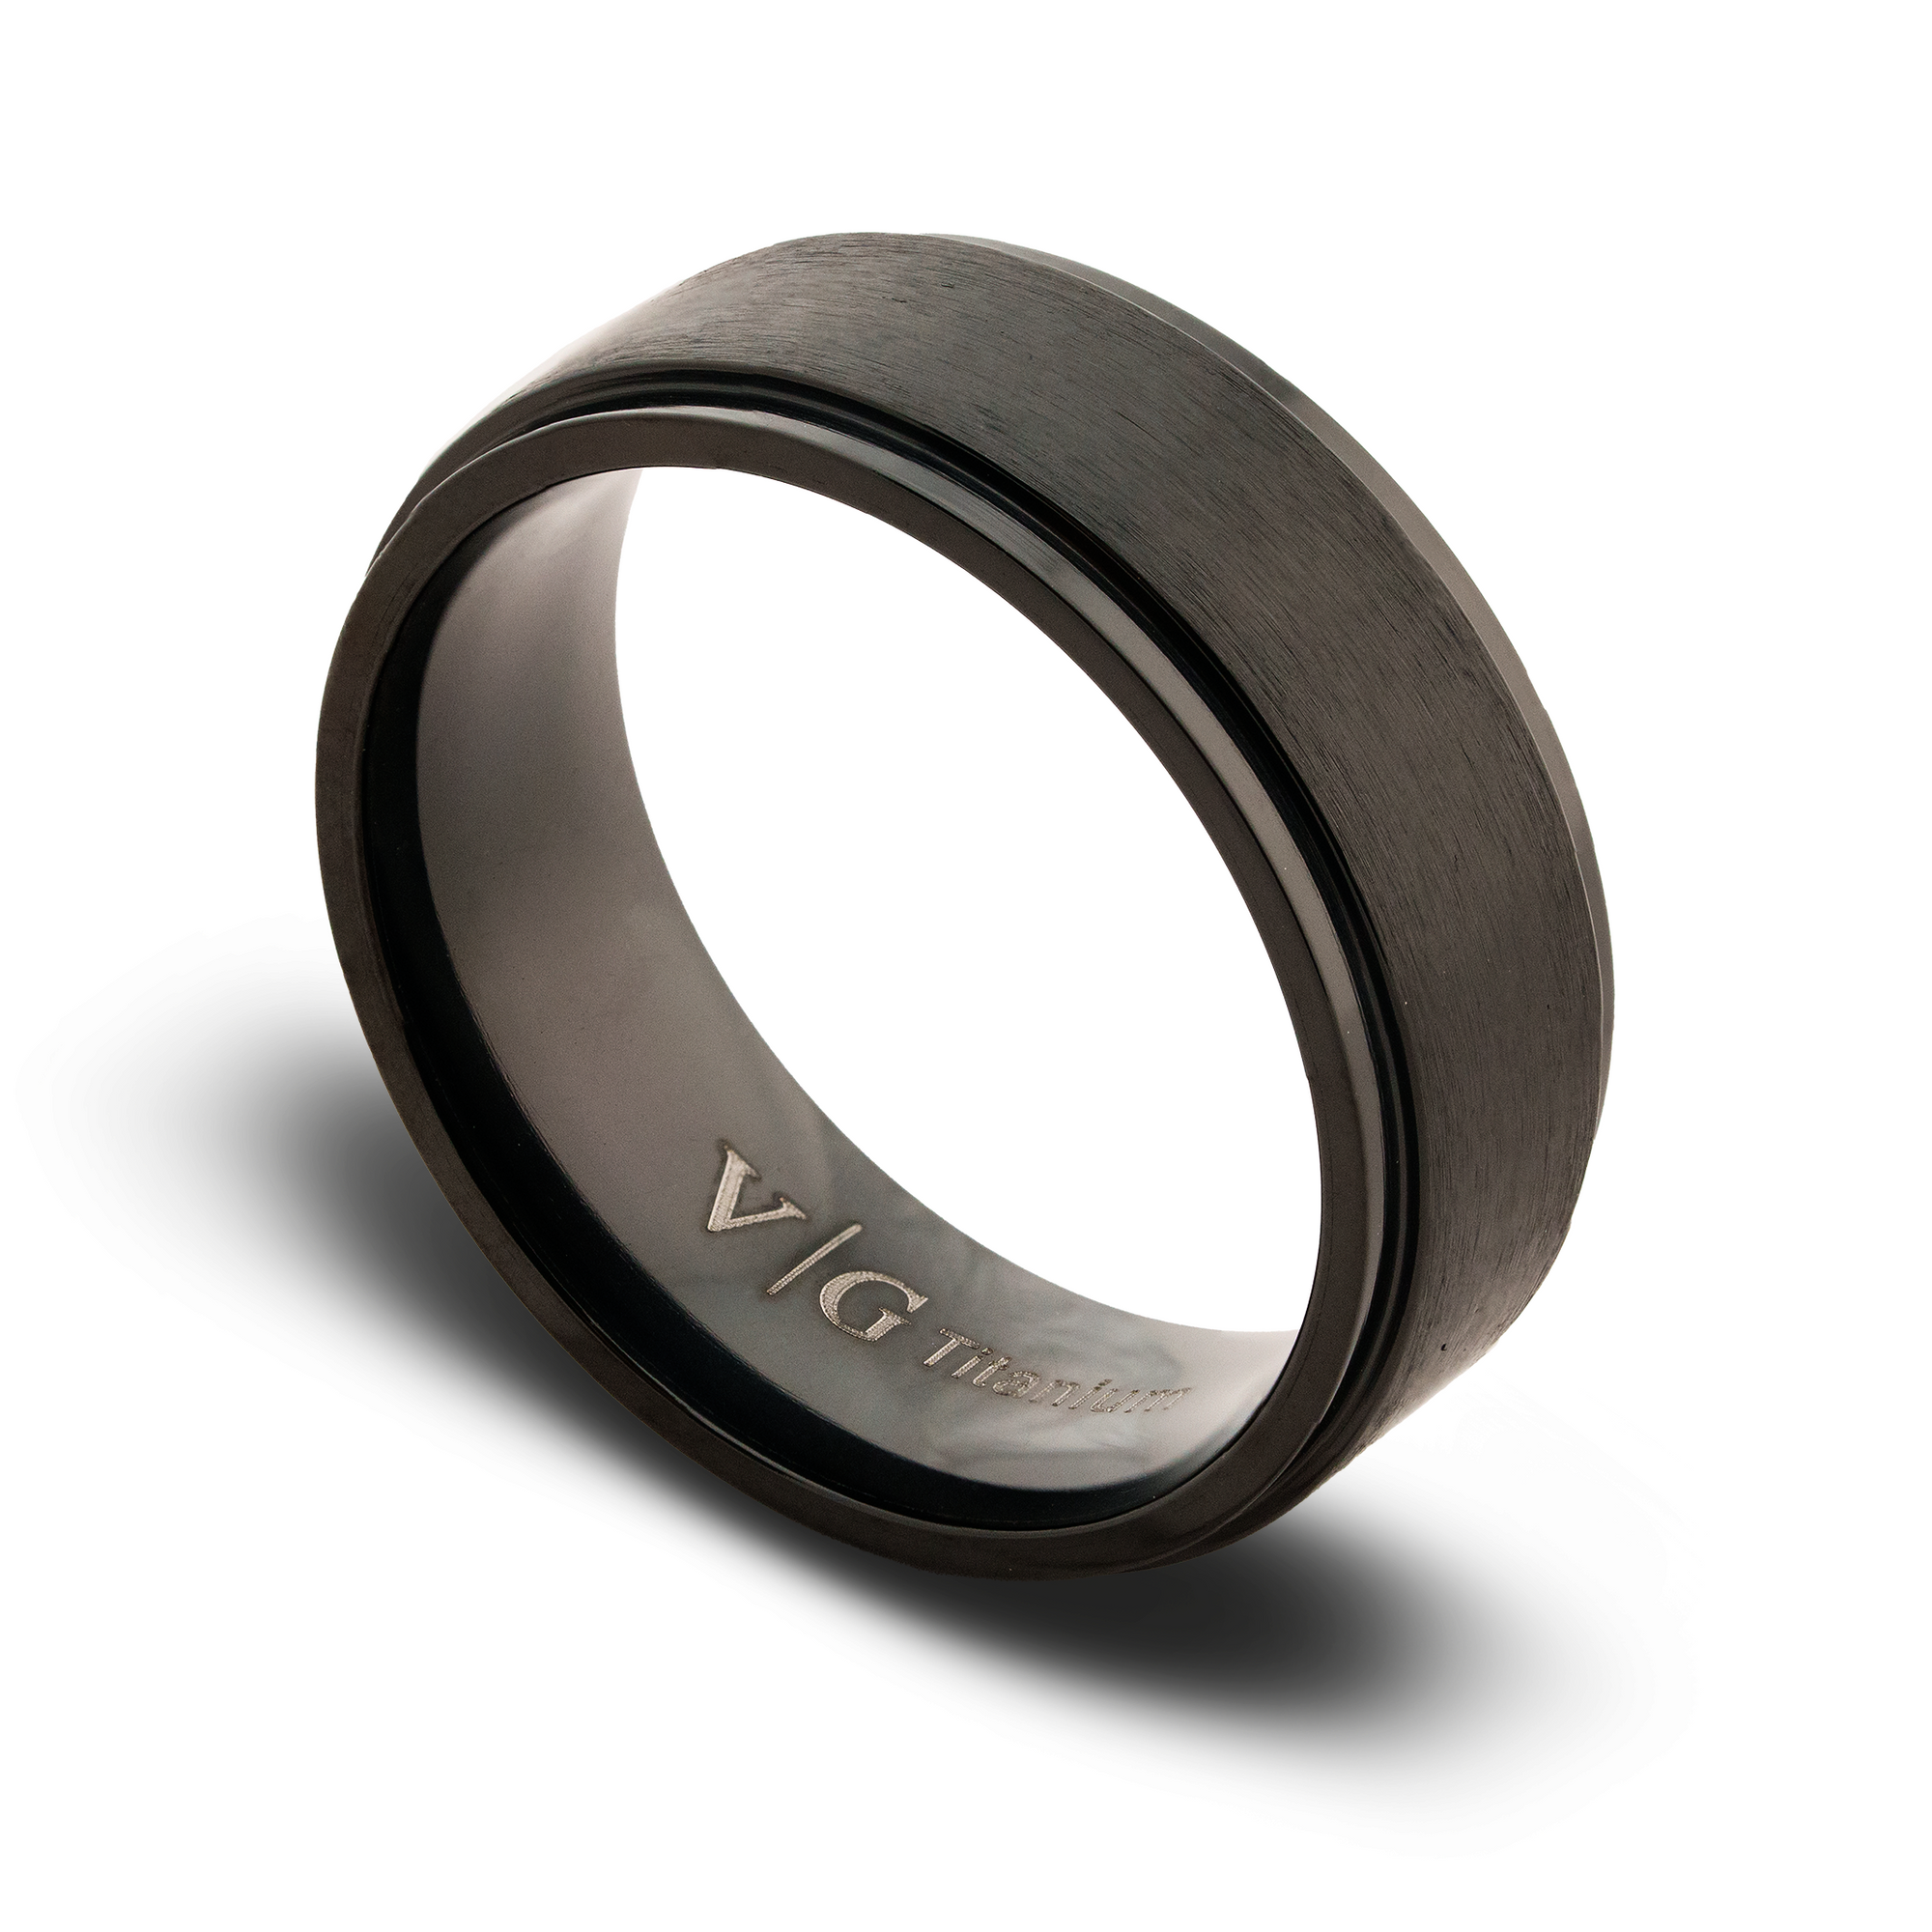 NEW: The “Midnight” Ring